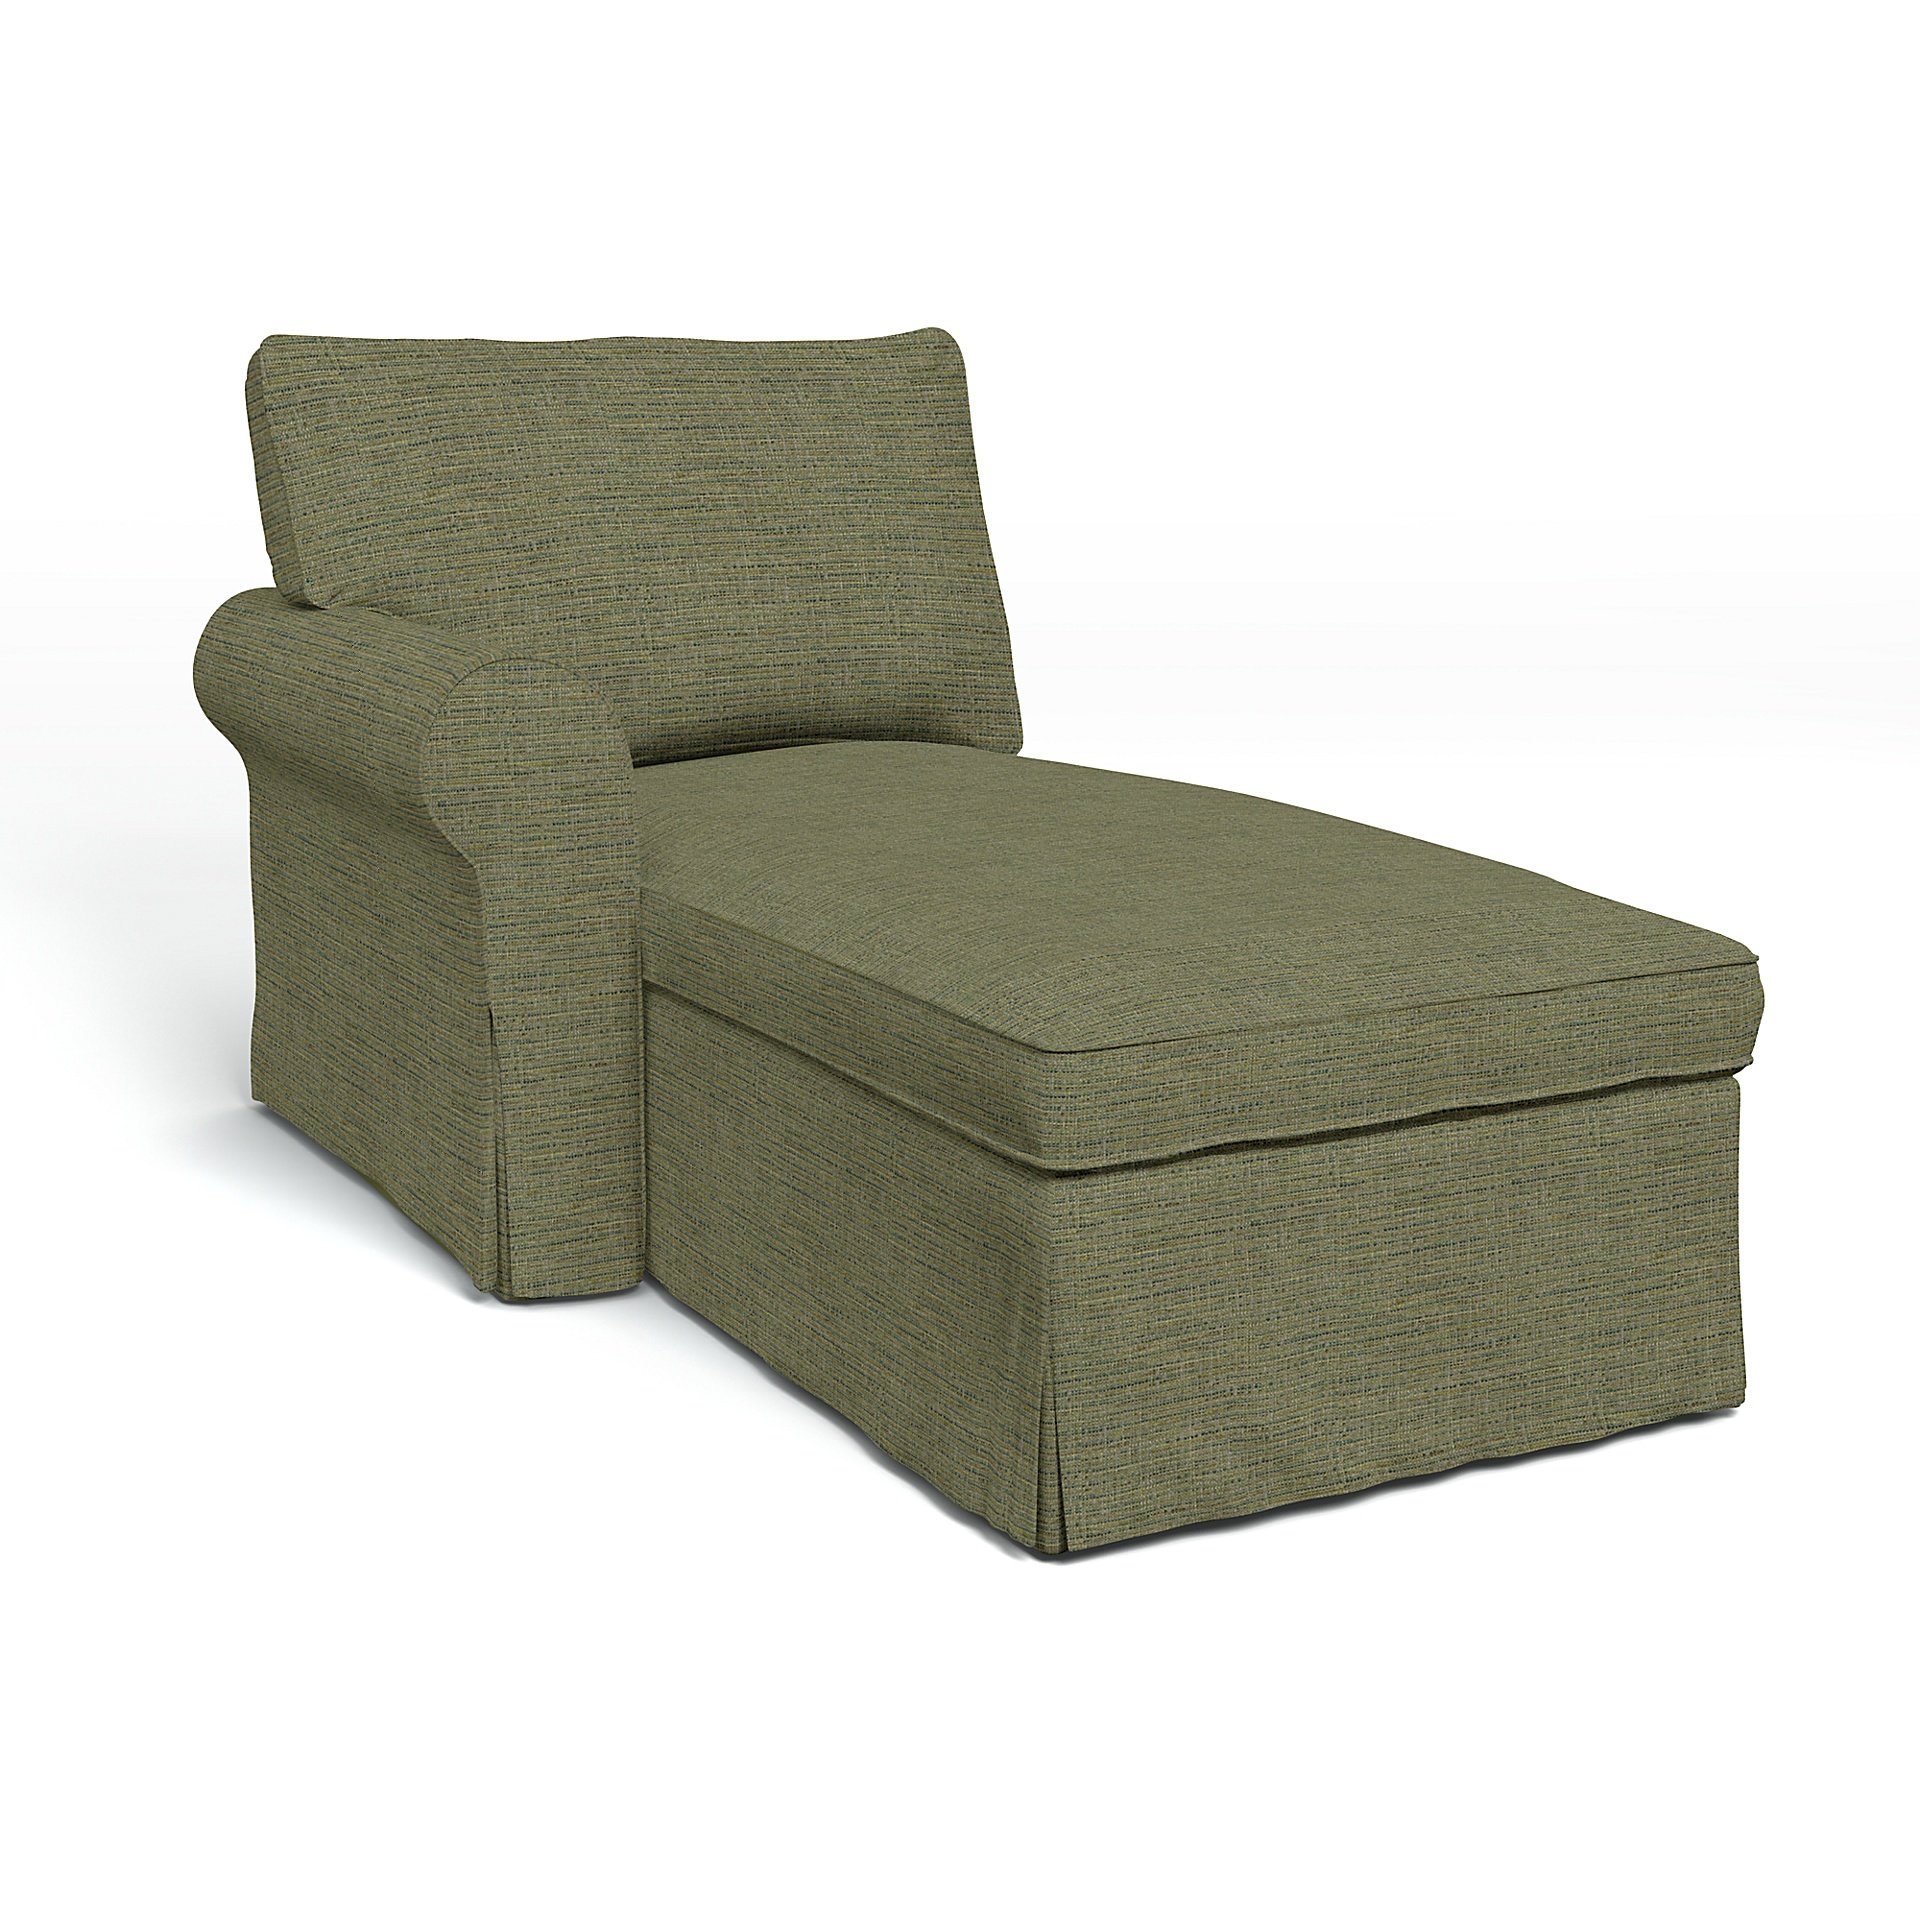 IKEA - Ektorp Chaise with Left Armrest Cover, Meadow Green, Boucle & Texture - Bemz